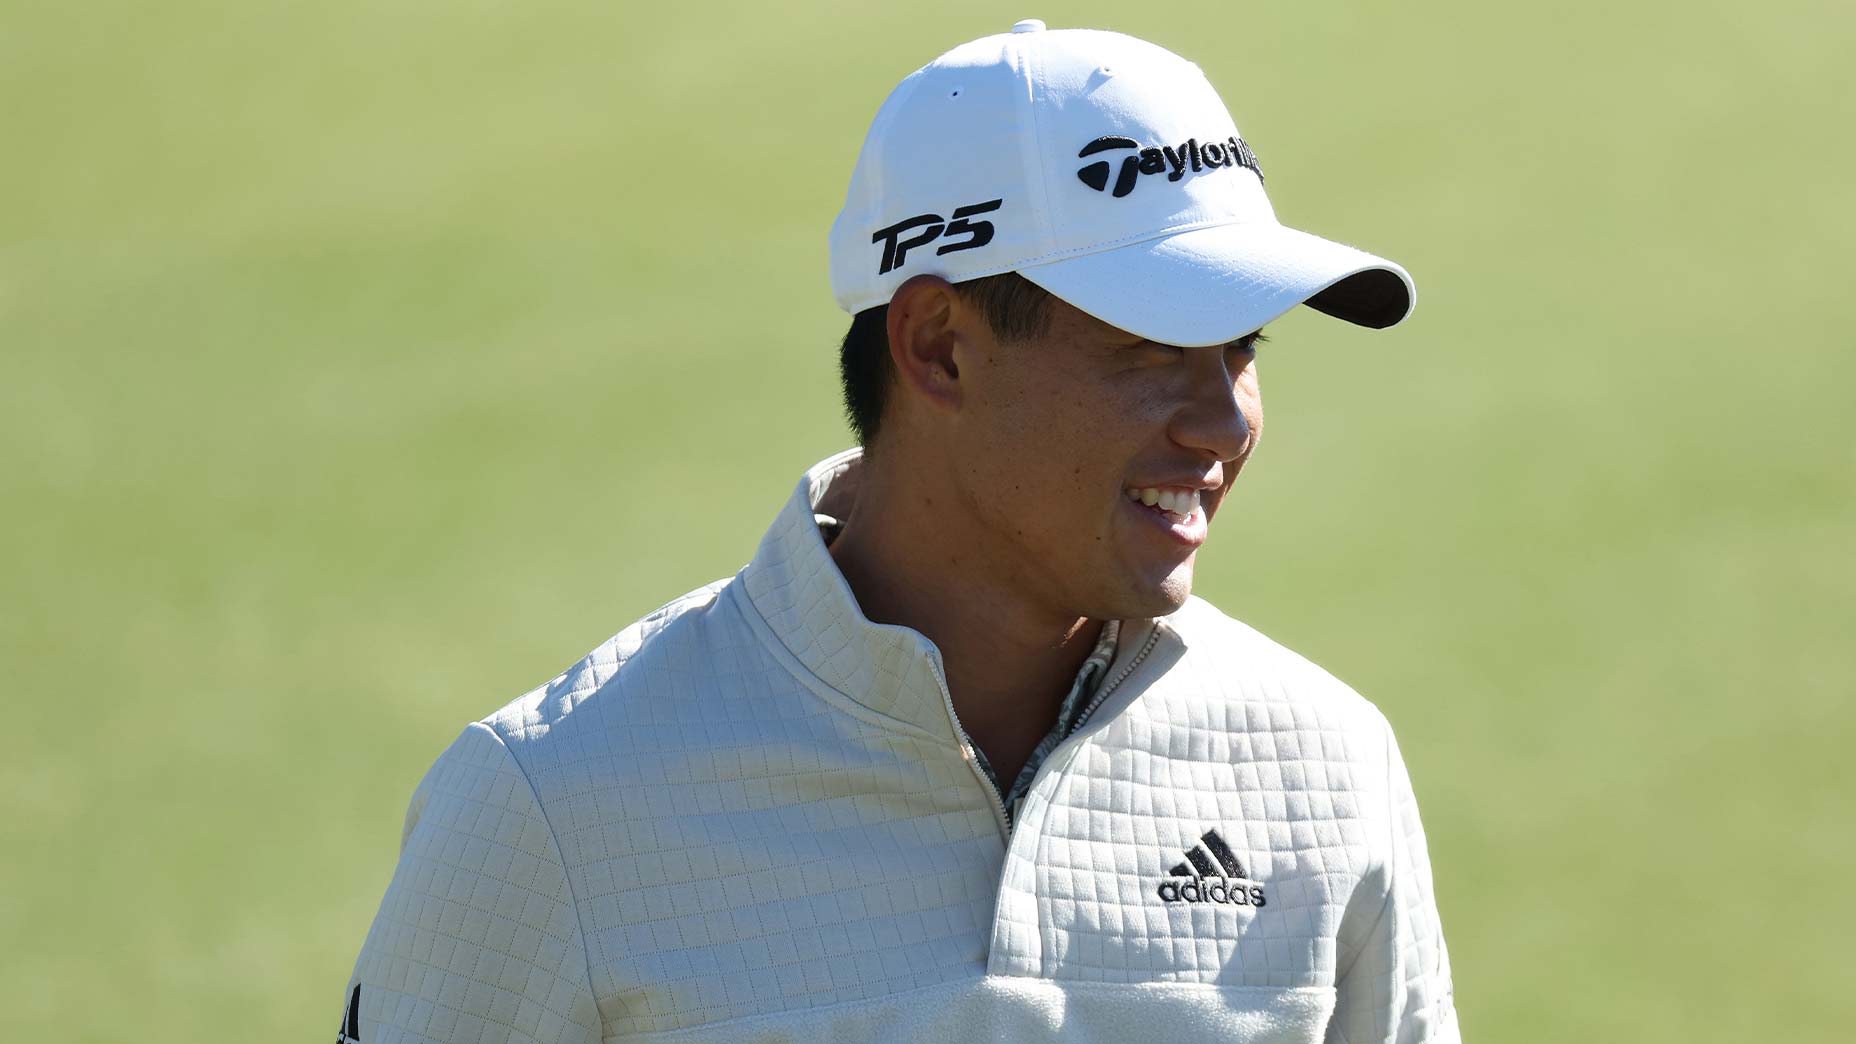 Spotted on Tour: Collin Morikawa’s Adidas quarter-zip is perfect for fall golf